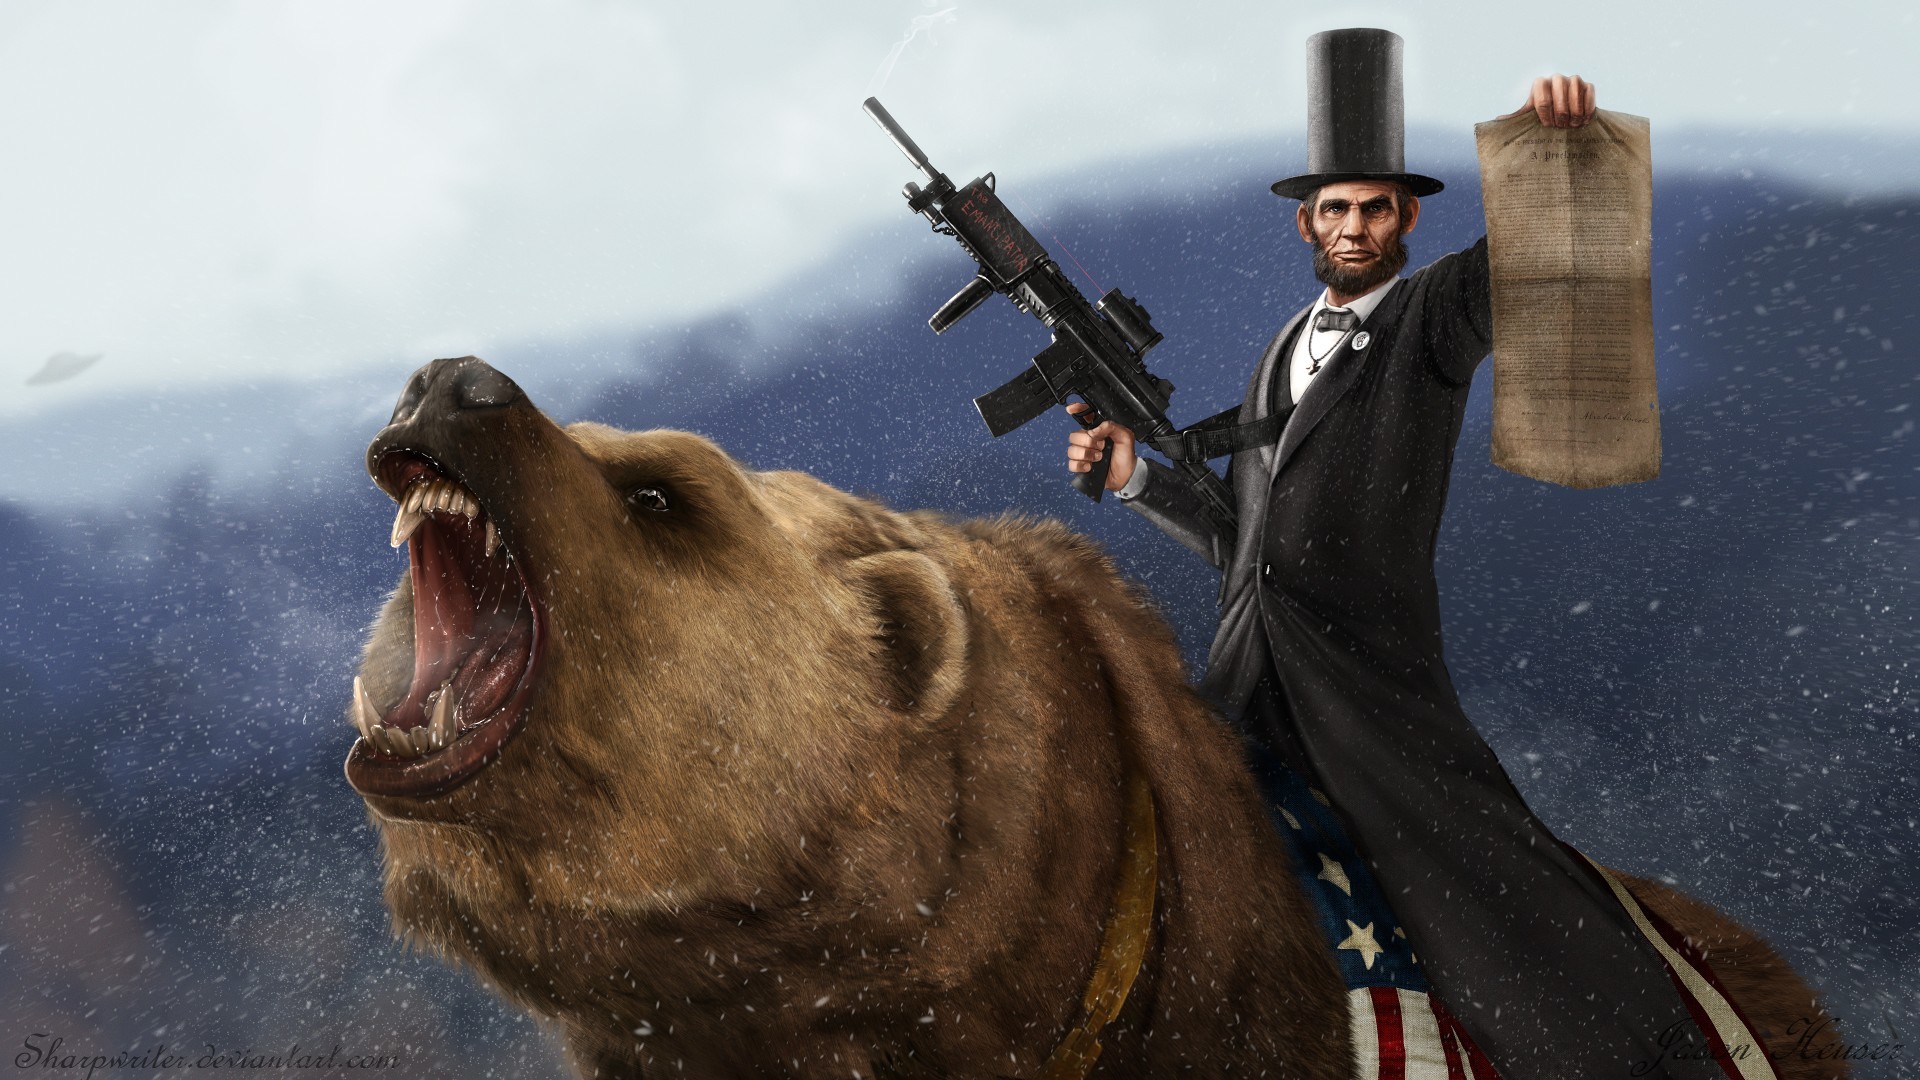 1920x1080 Abraham Lincoln riding the infamous anti-slavery bear